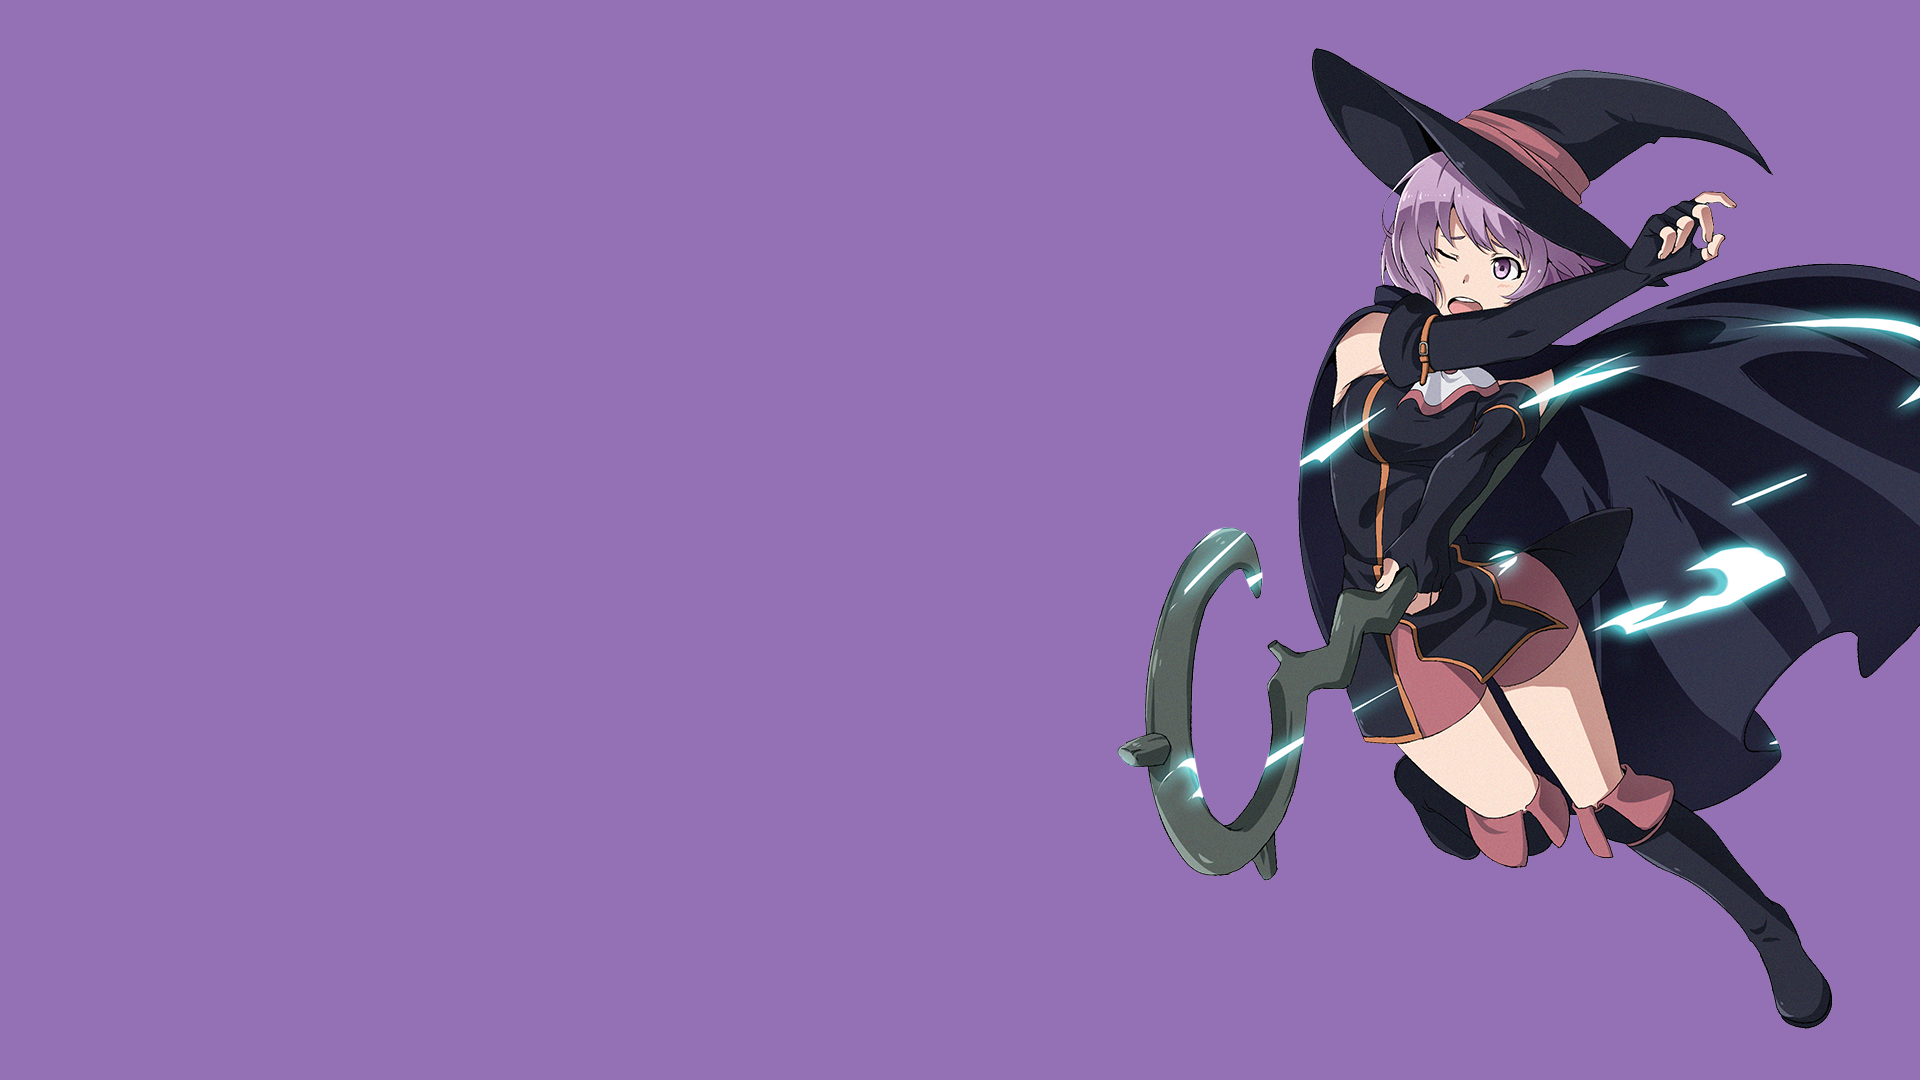 Anime 1920x1080 anime anime girls witch hat Hai to Gensou no Grimgar Shihoru (Hai to Gensou no Grimgar) fantasy art fantasy girl purple background one eye closed staff witch hat women with hats open mouth